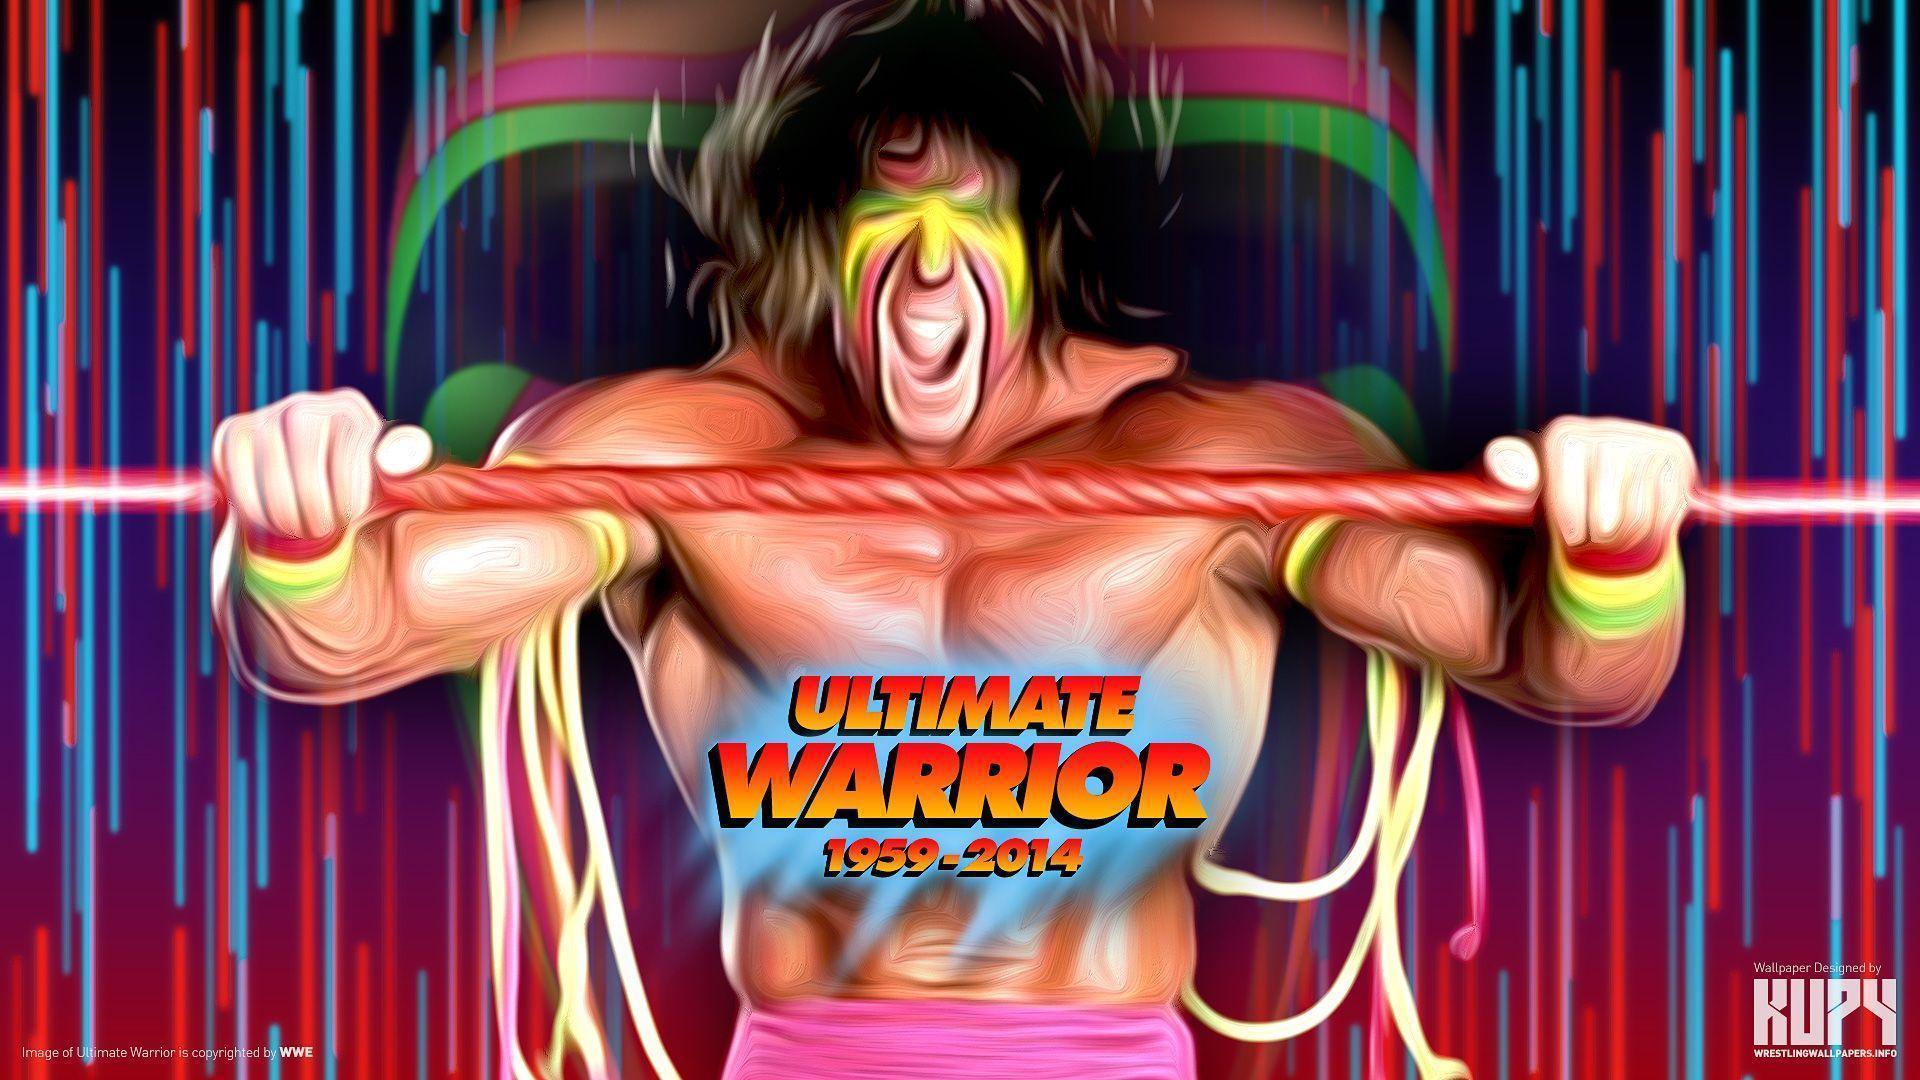 The Ultimate Warrior Wallpapers - Wallpaper Cave